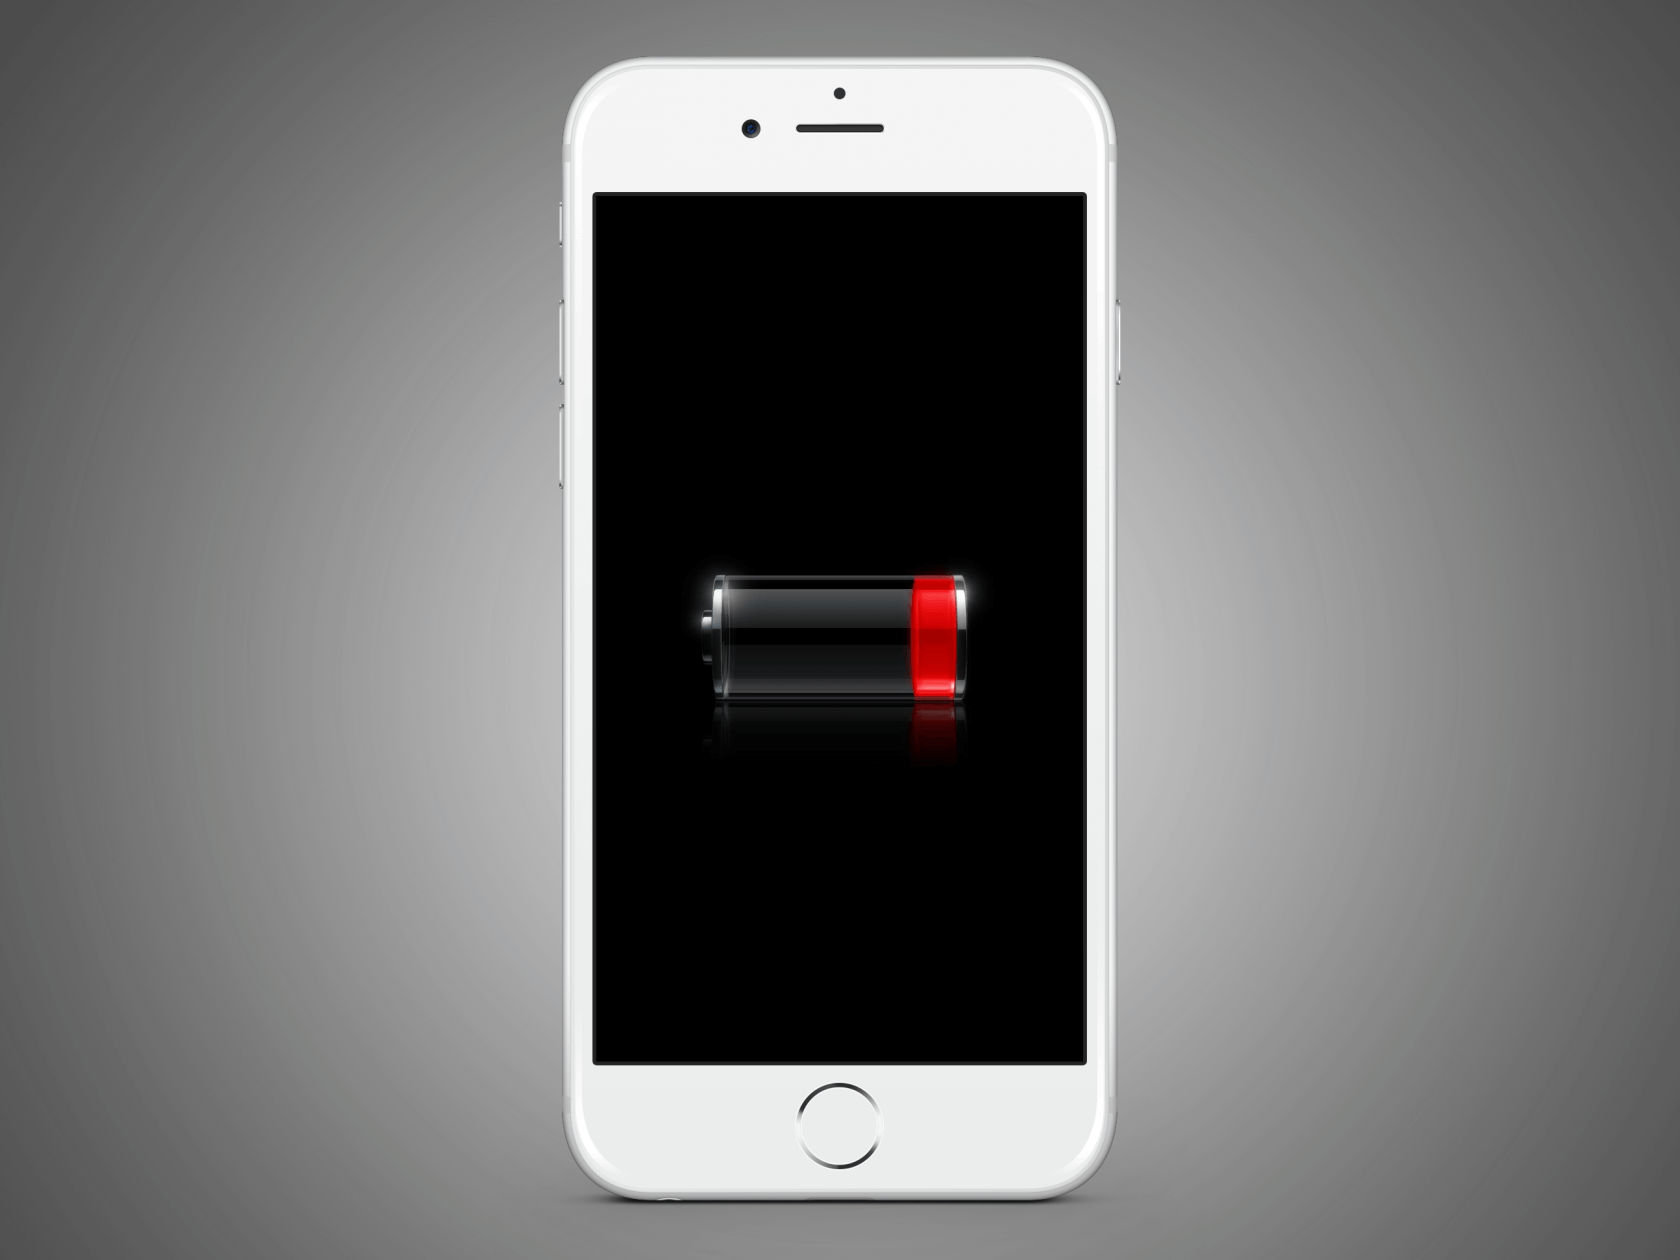 Wait! Don't pay the $29 fee to replace your iPhone 6s battery just yet